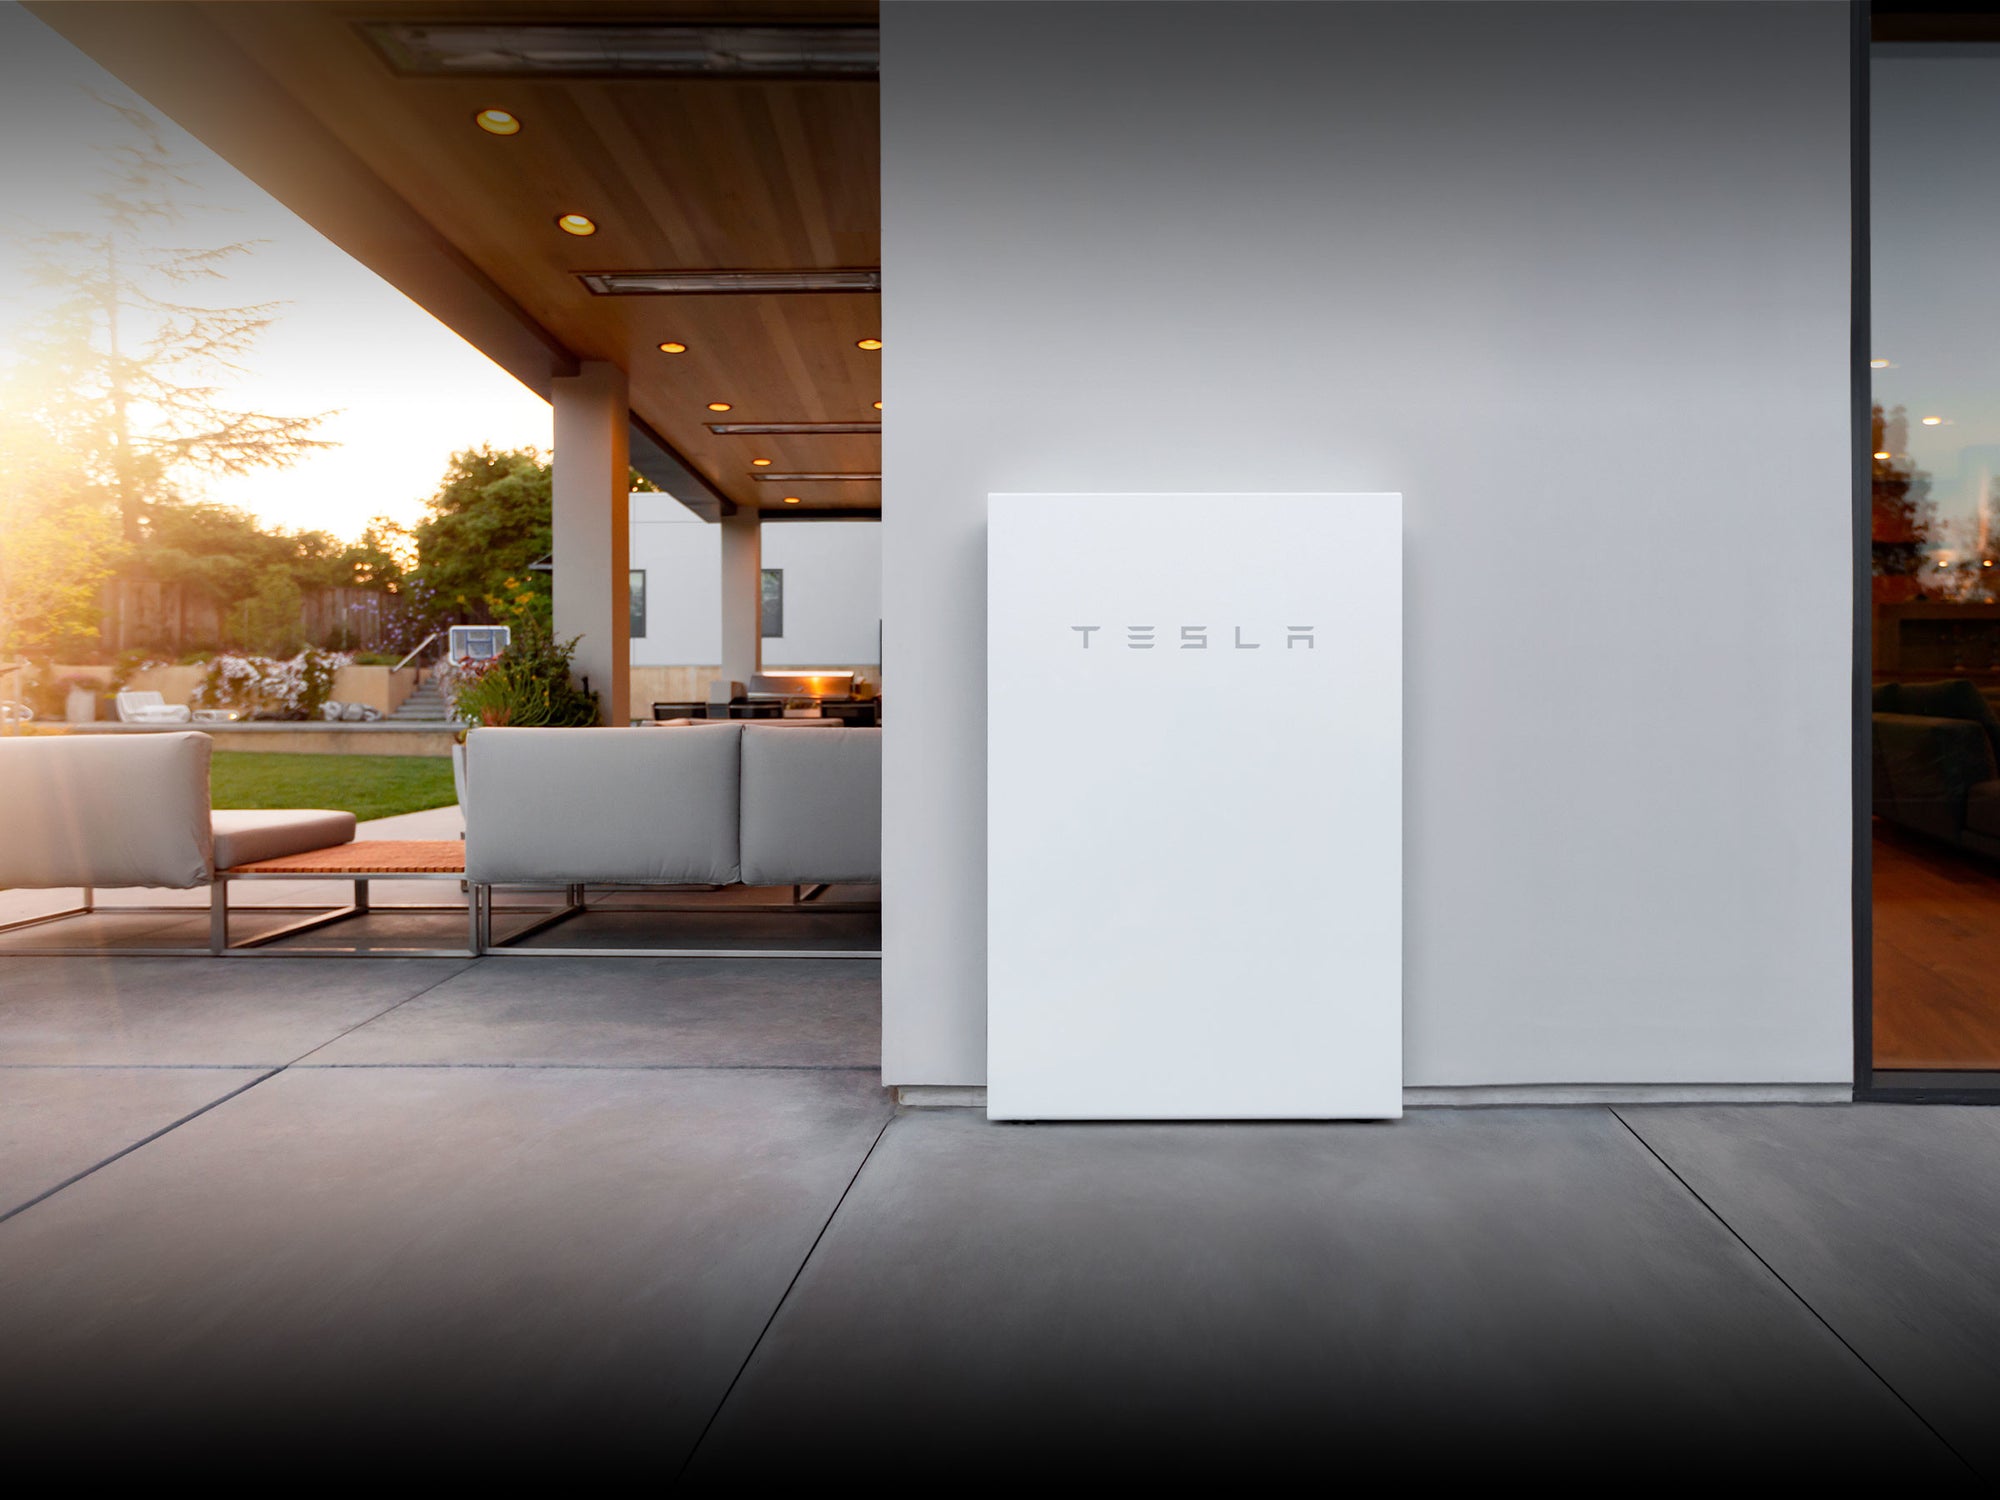 Powerwall - An Energy Solution for the Home